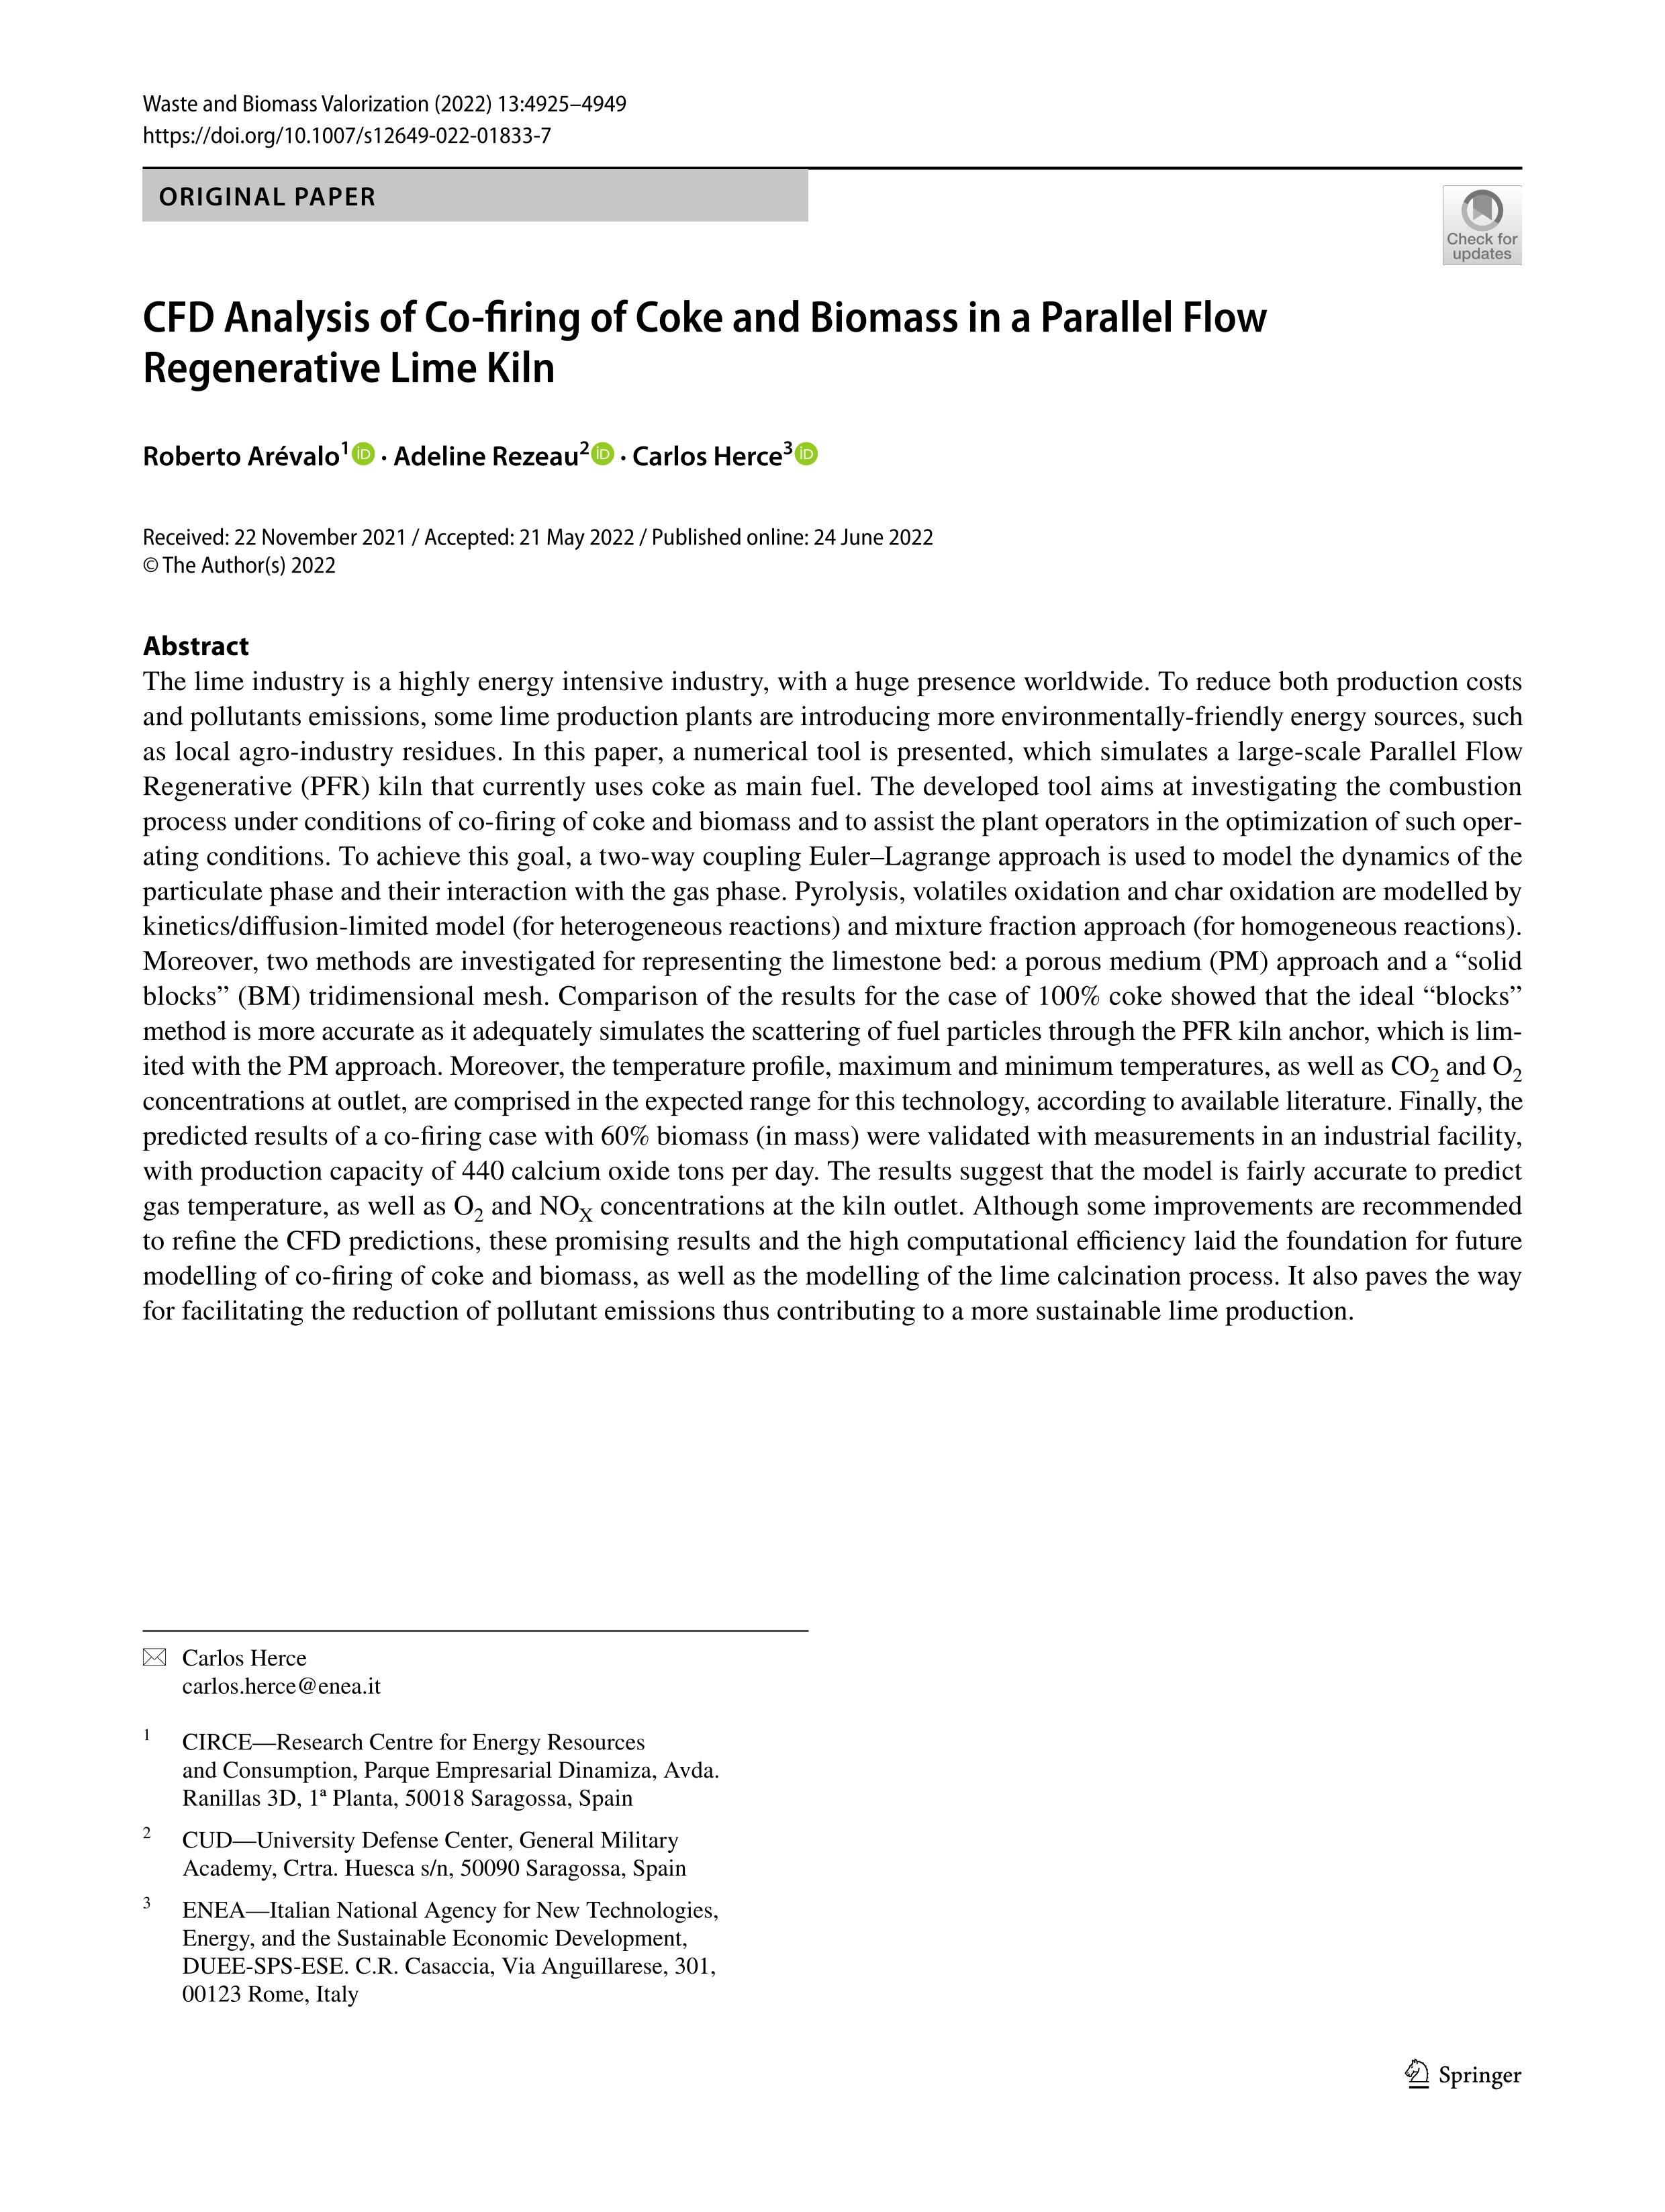 CFD analysis of co-firing of coke and biomass in a parallel flow regenerative lime kiln